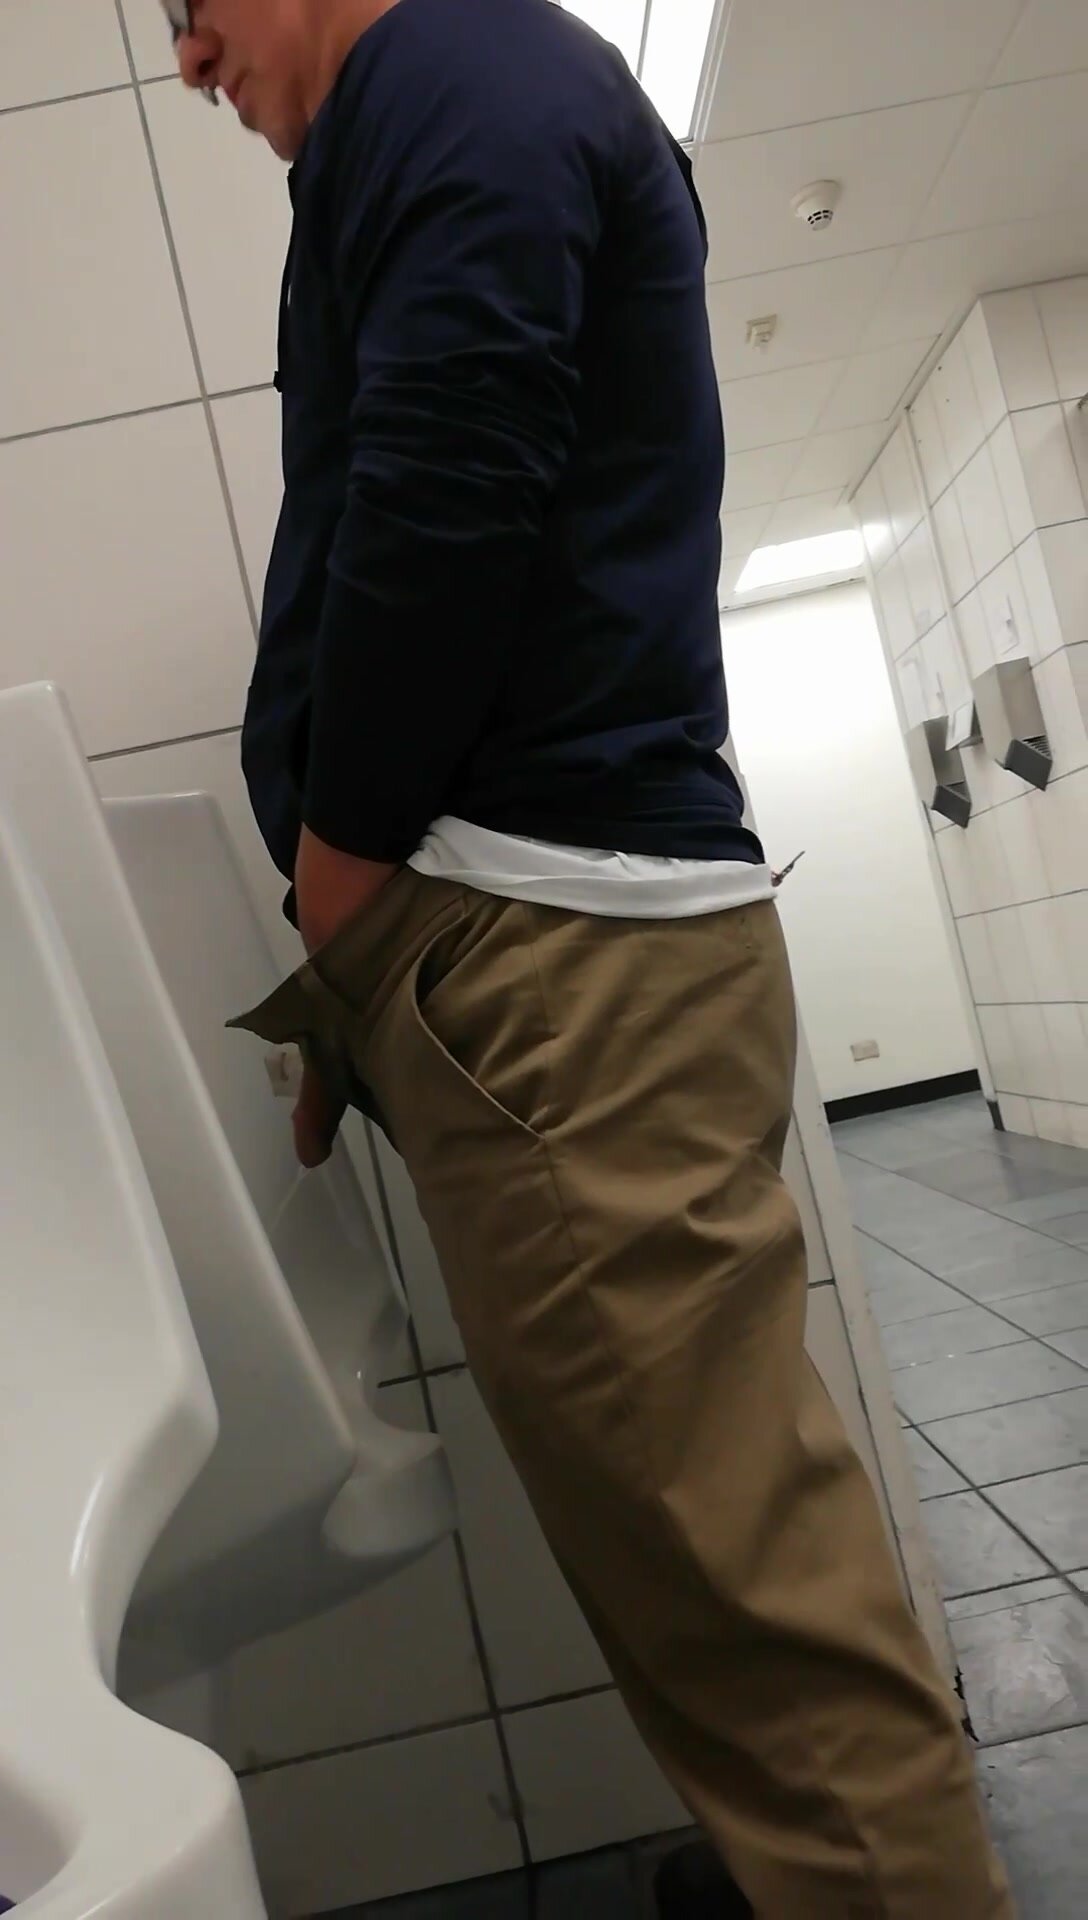 Daddy pissing 2 pic